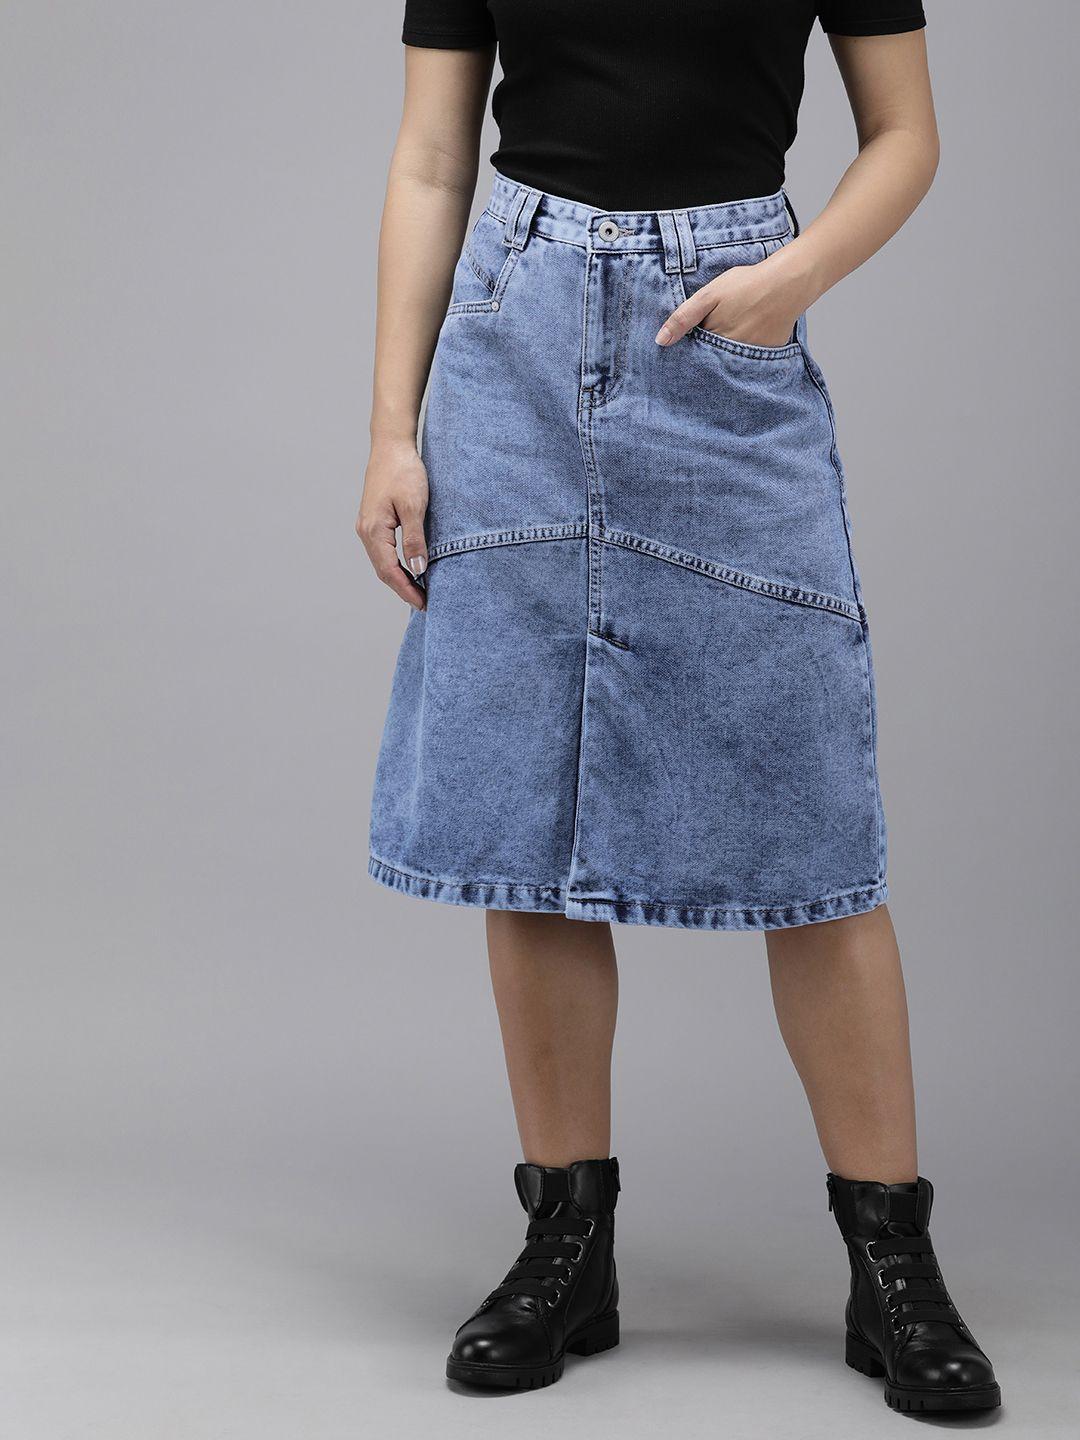 the roadster life co. women solid mid-rise a-line denim skirt